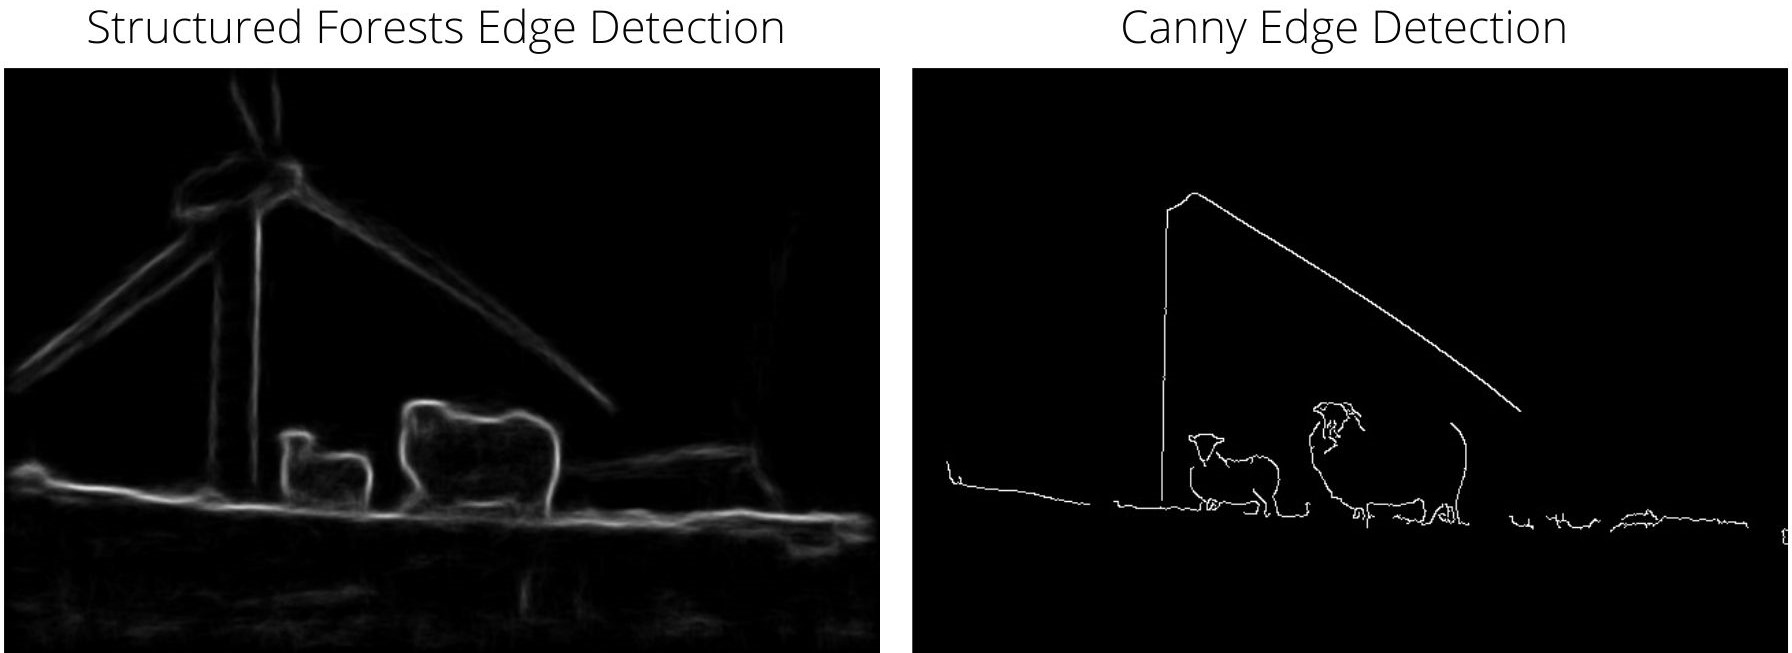 Edge Detection using Structured Forests with OpenCV